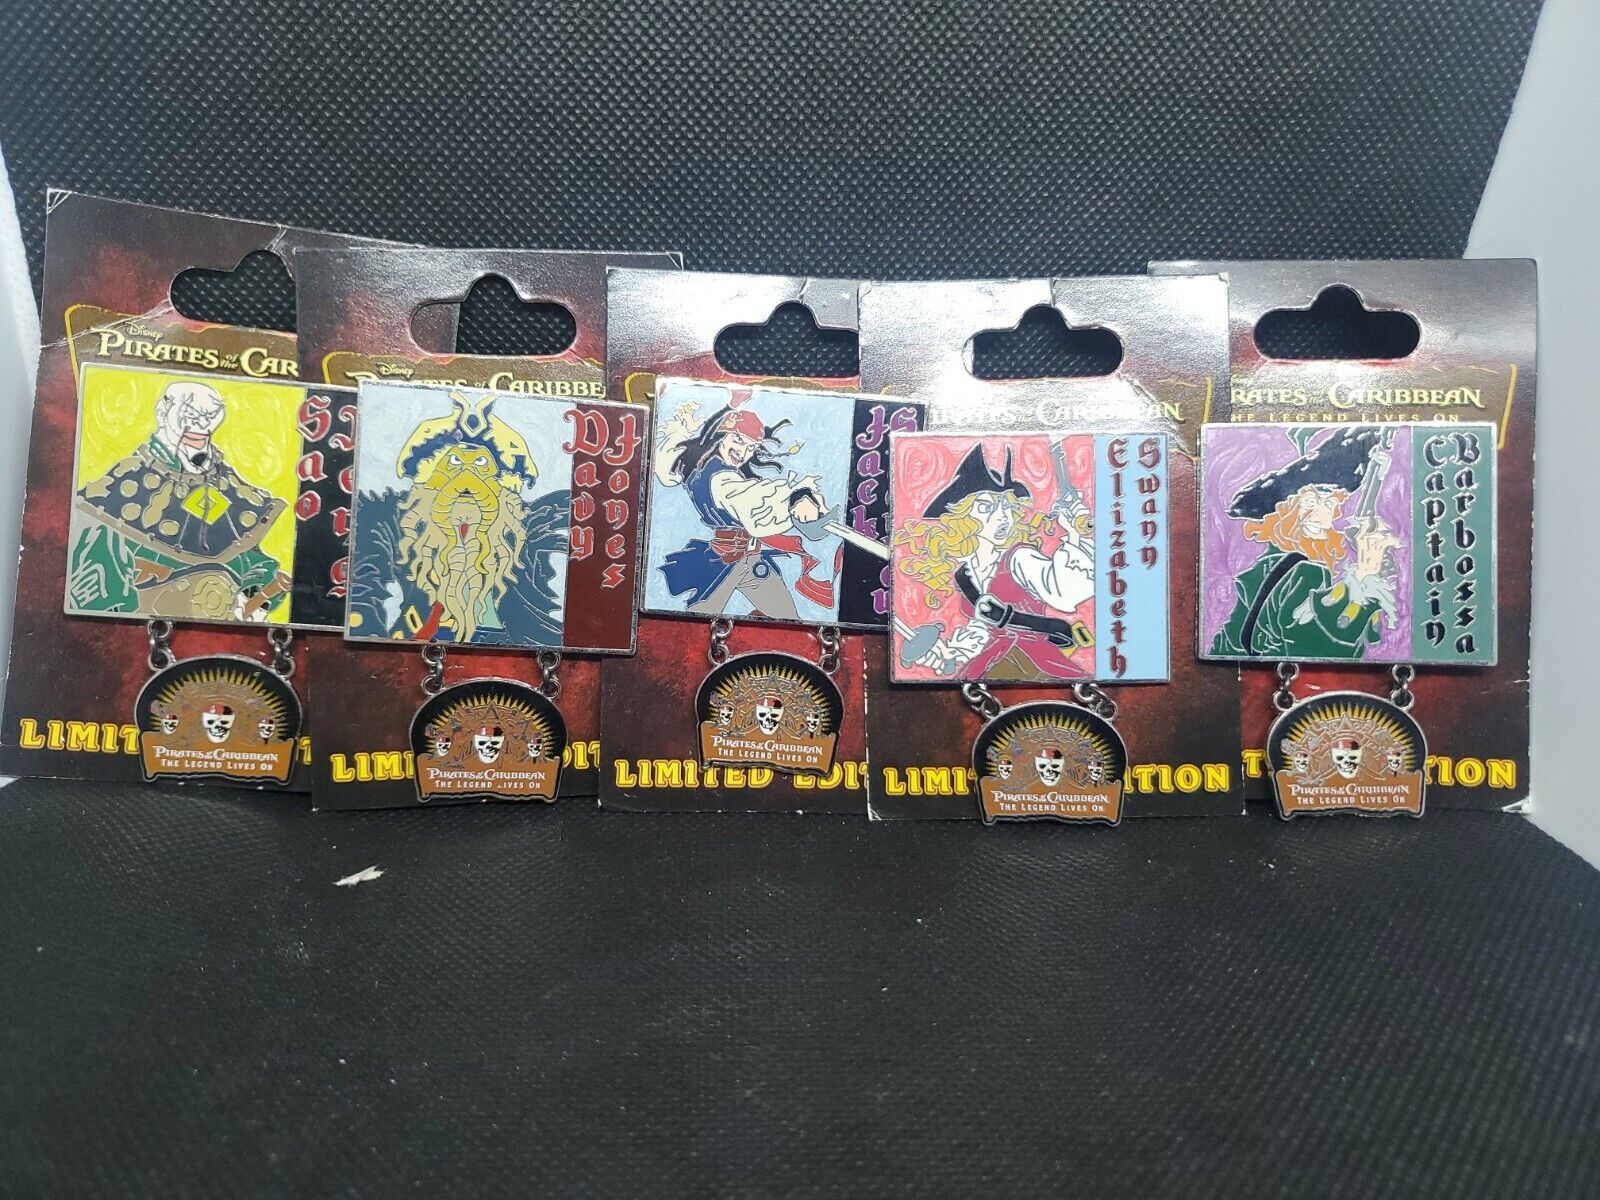 Pirates Of The Caribbean The Legend Lives On Le 2000 Disney Pin Complete Set